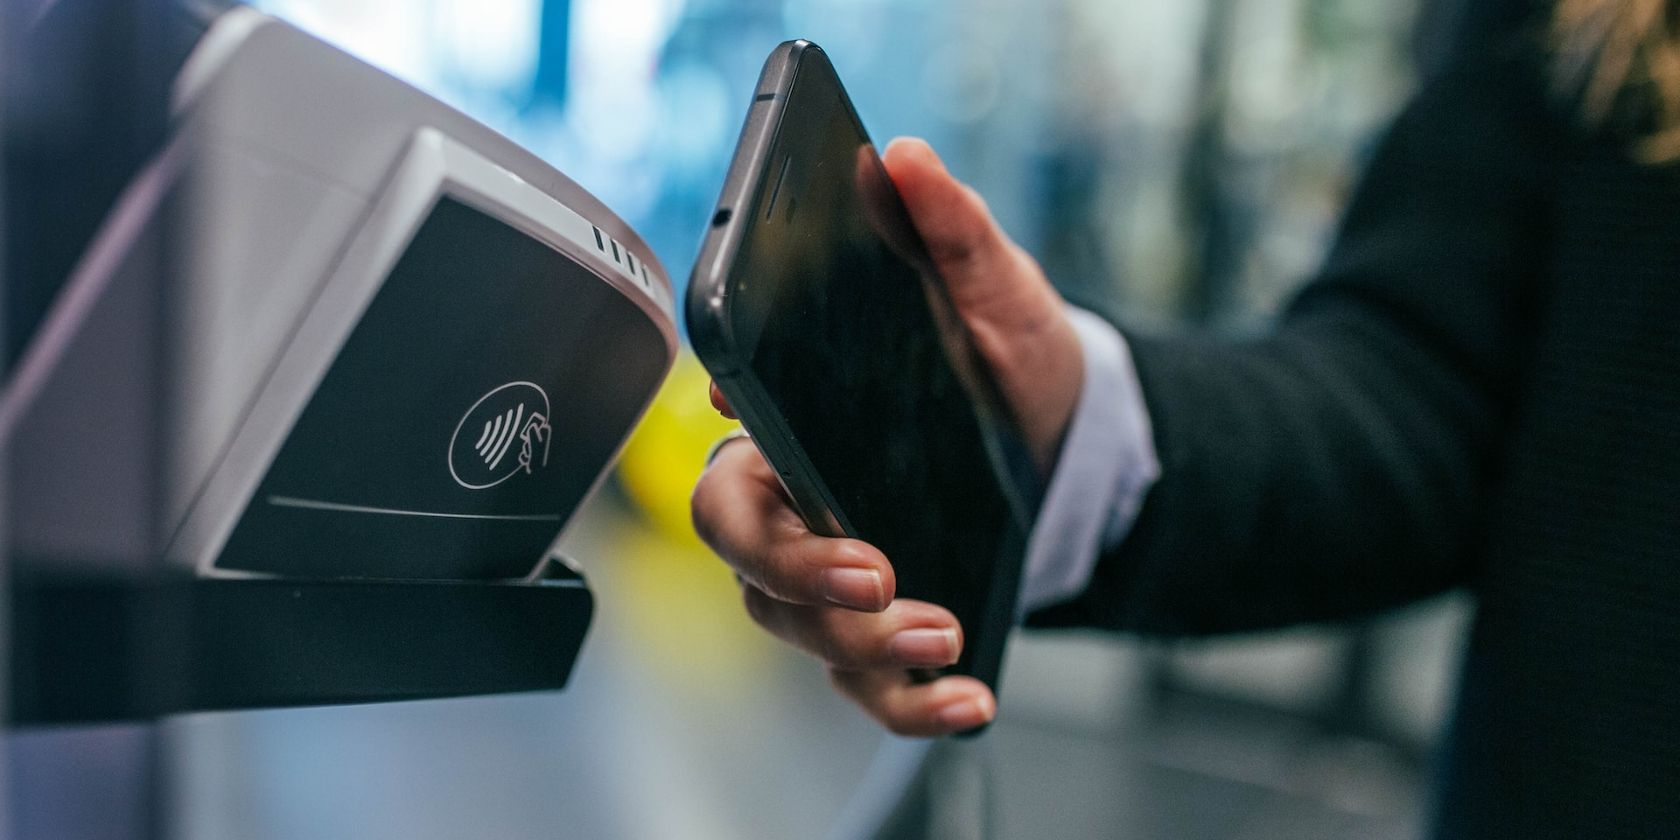 Person holding smartphone close to a payment terminal